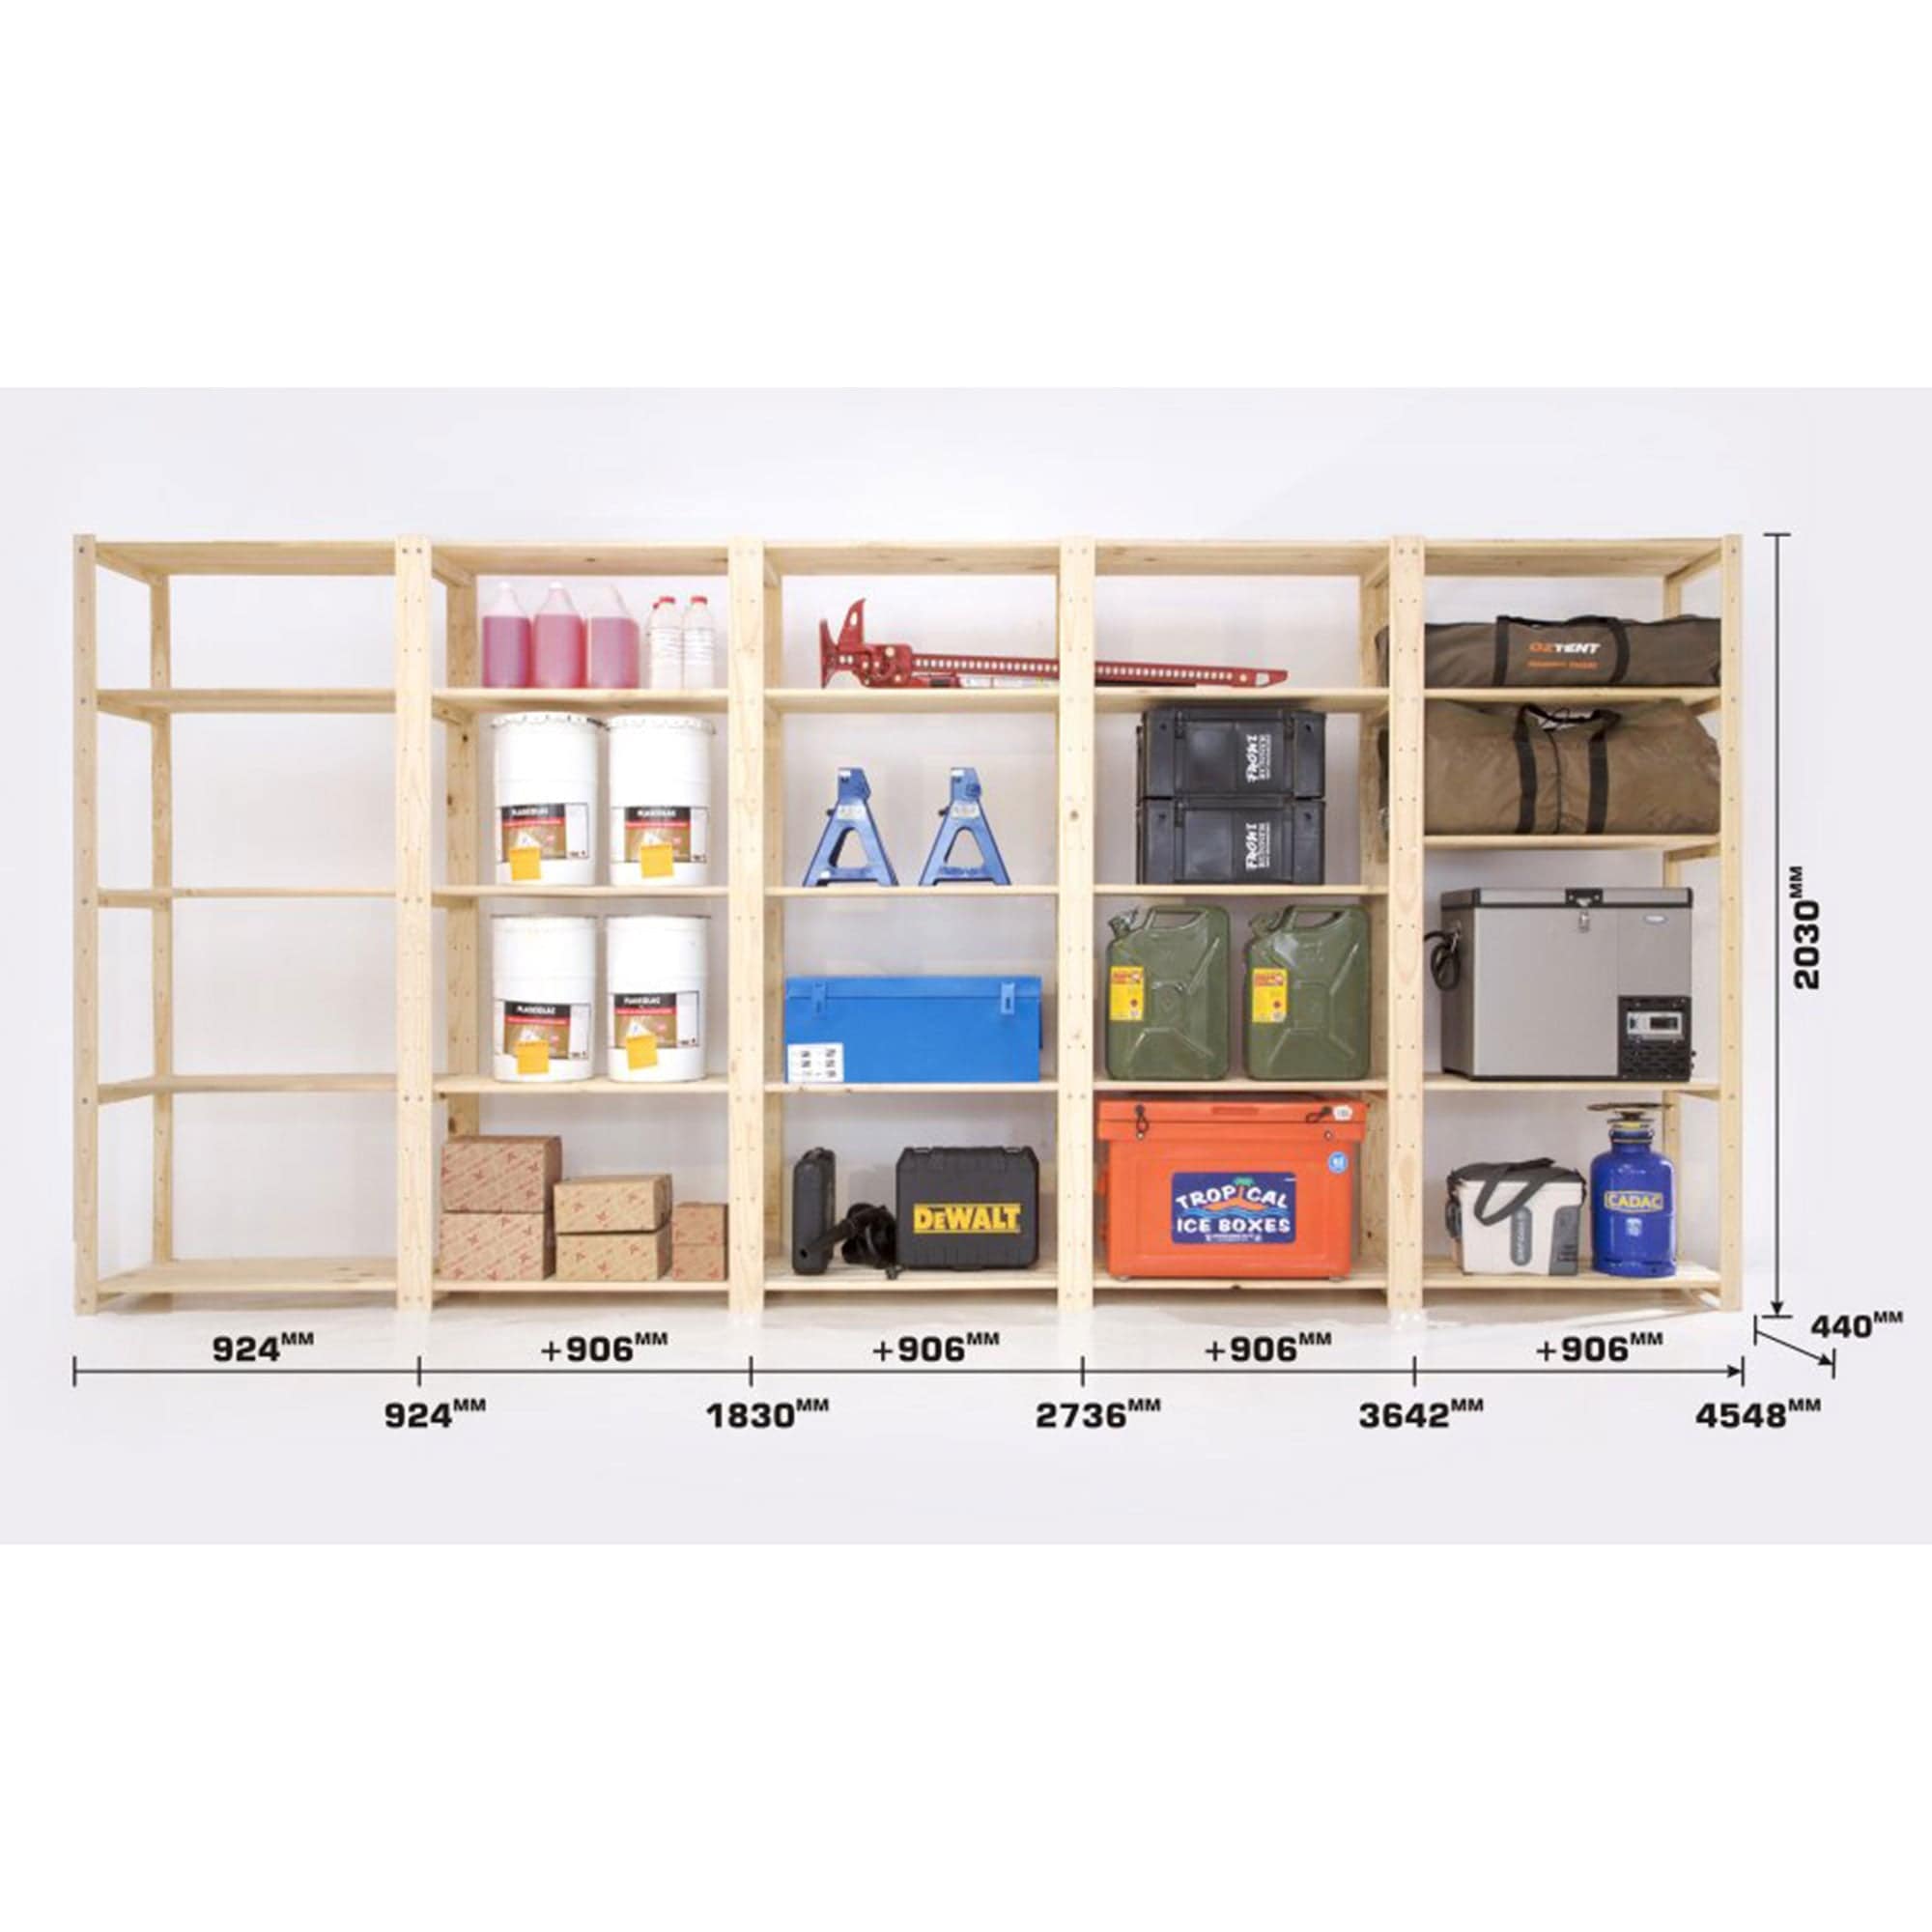 5 Bay DIY Wooden Shelving with 5 levels of Shelves (2.4m High) - Garage Guys